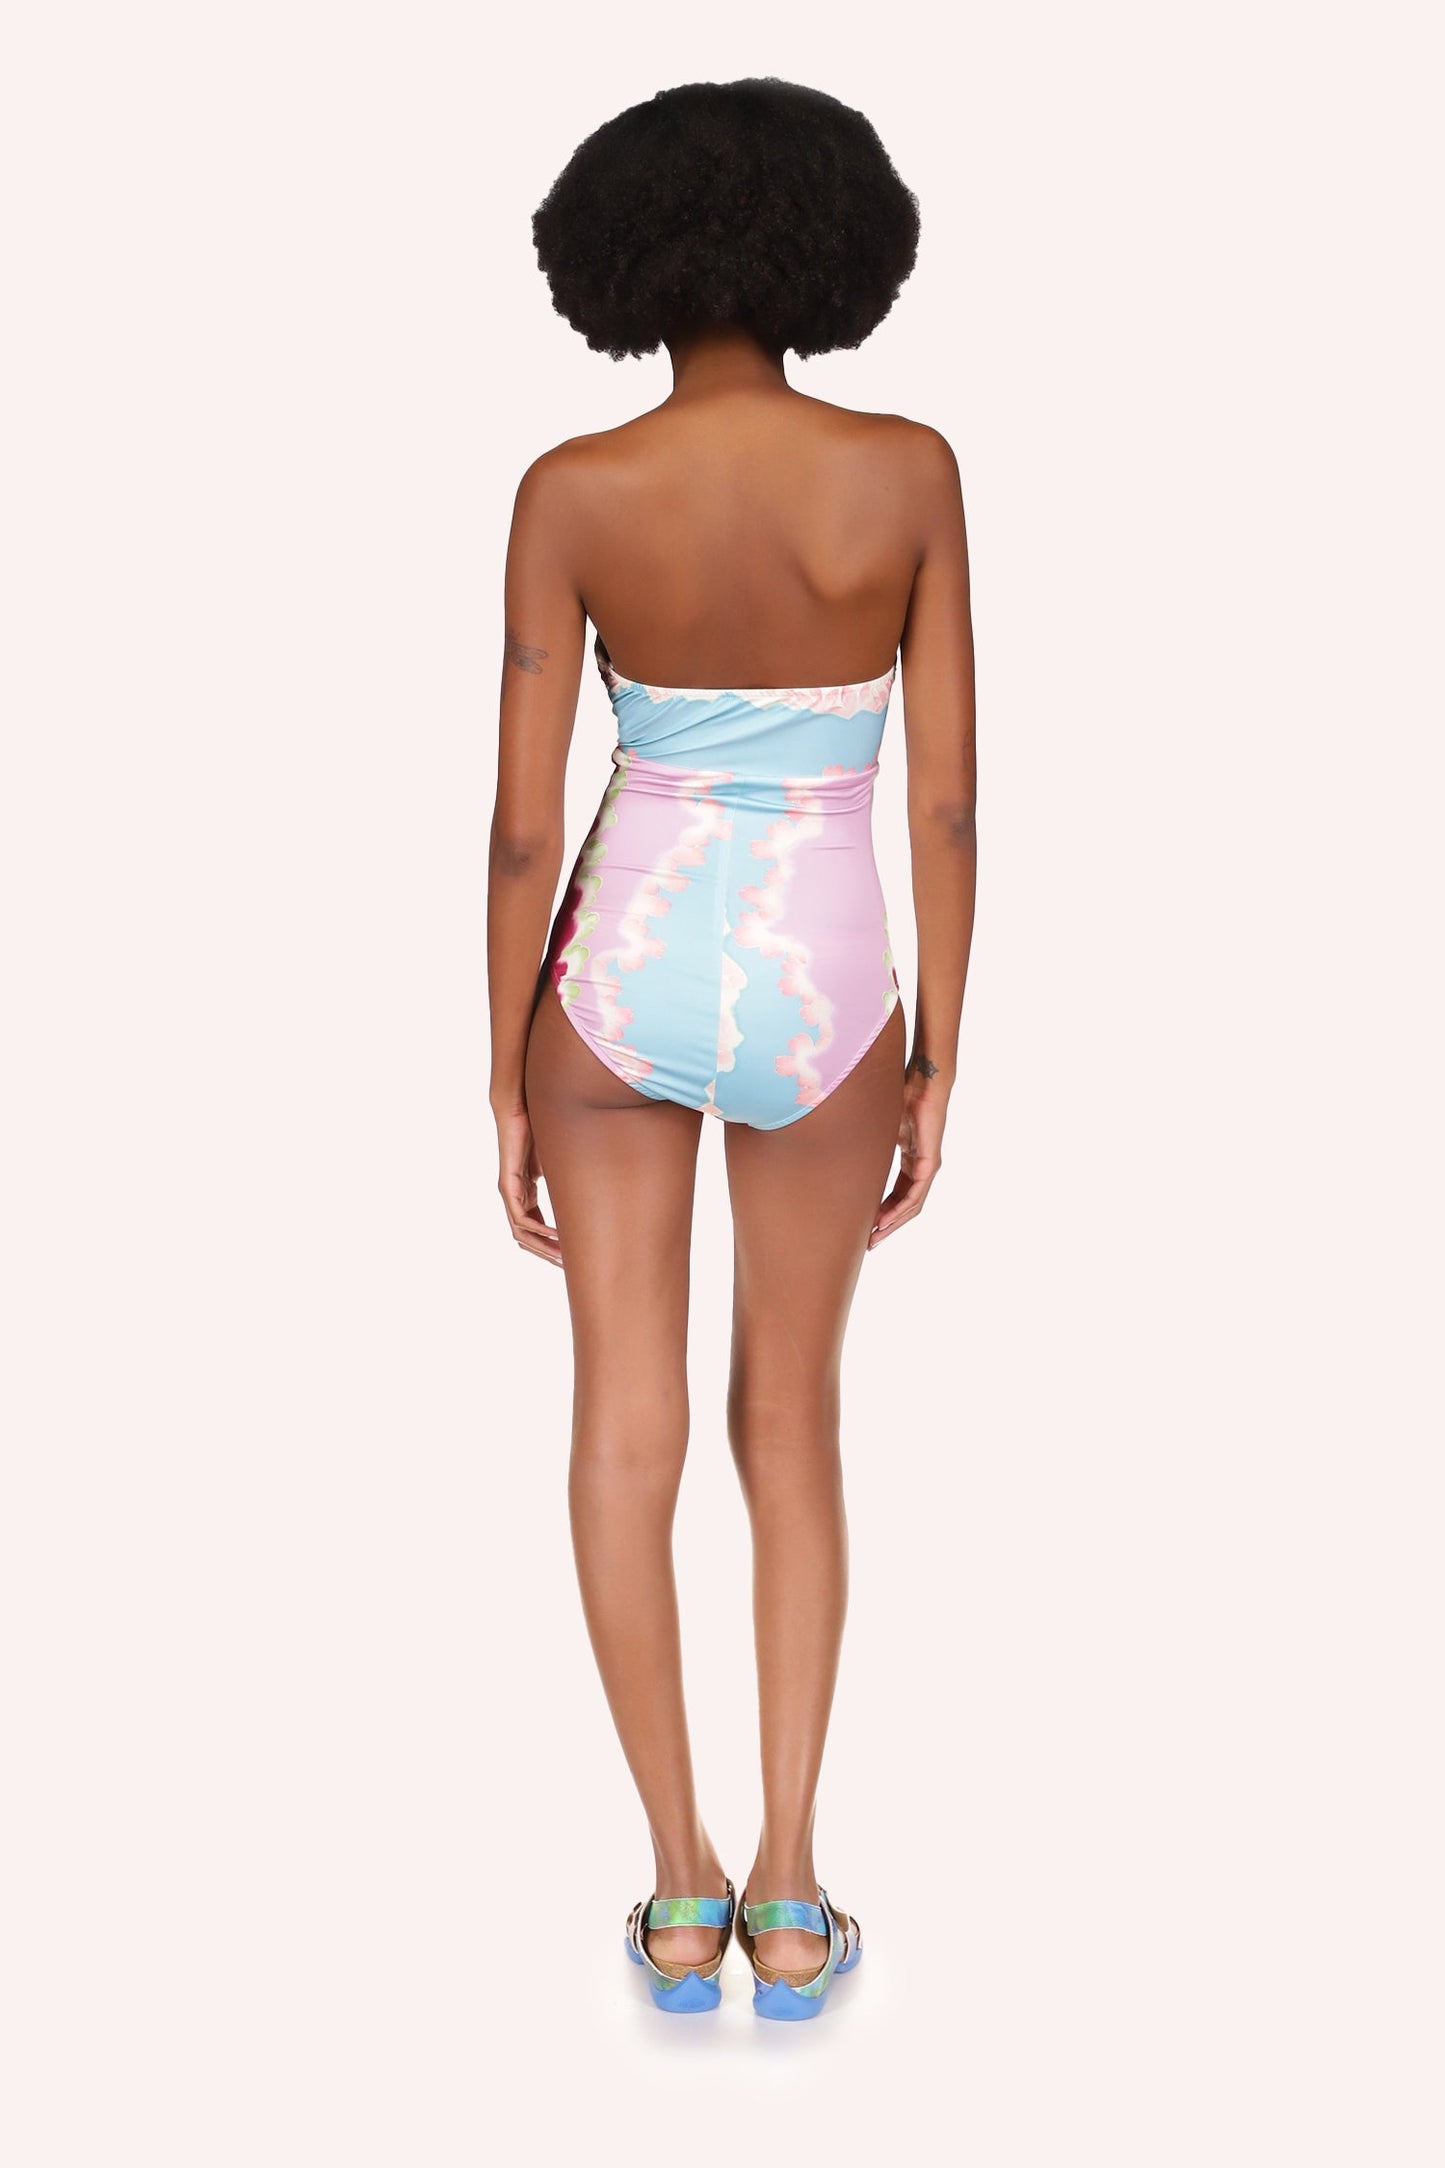 Bathing suit is in stretch fabric, Multi-colored wavy lines cloudy design, fits like a second skin